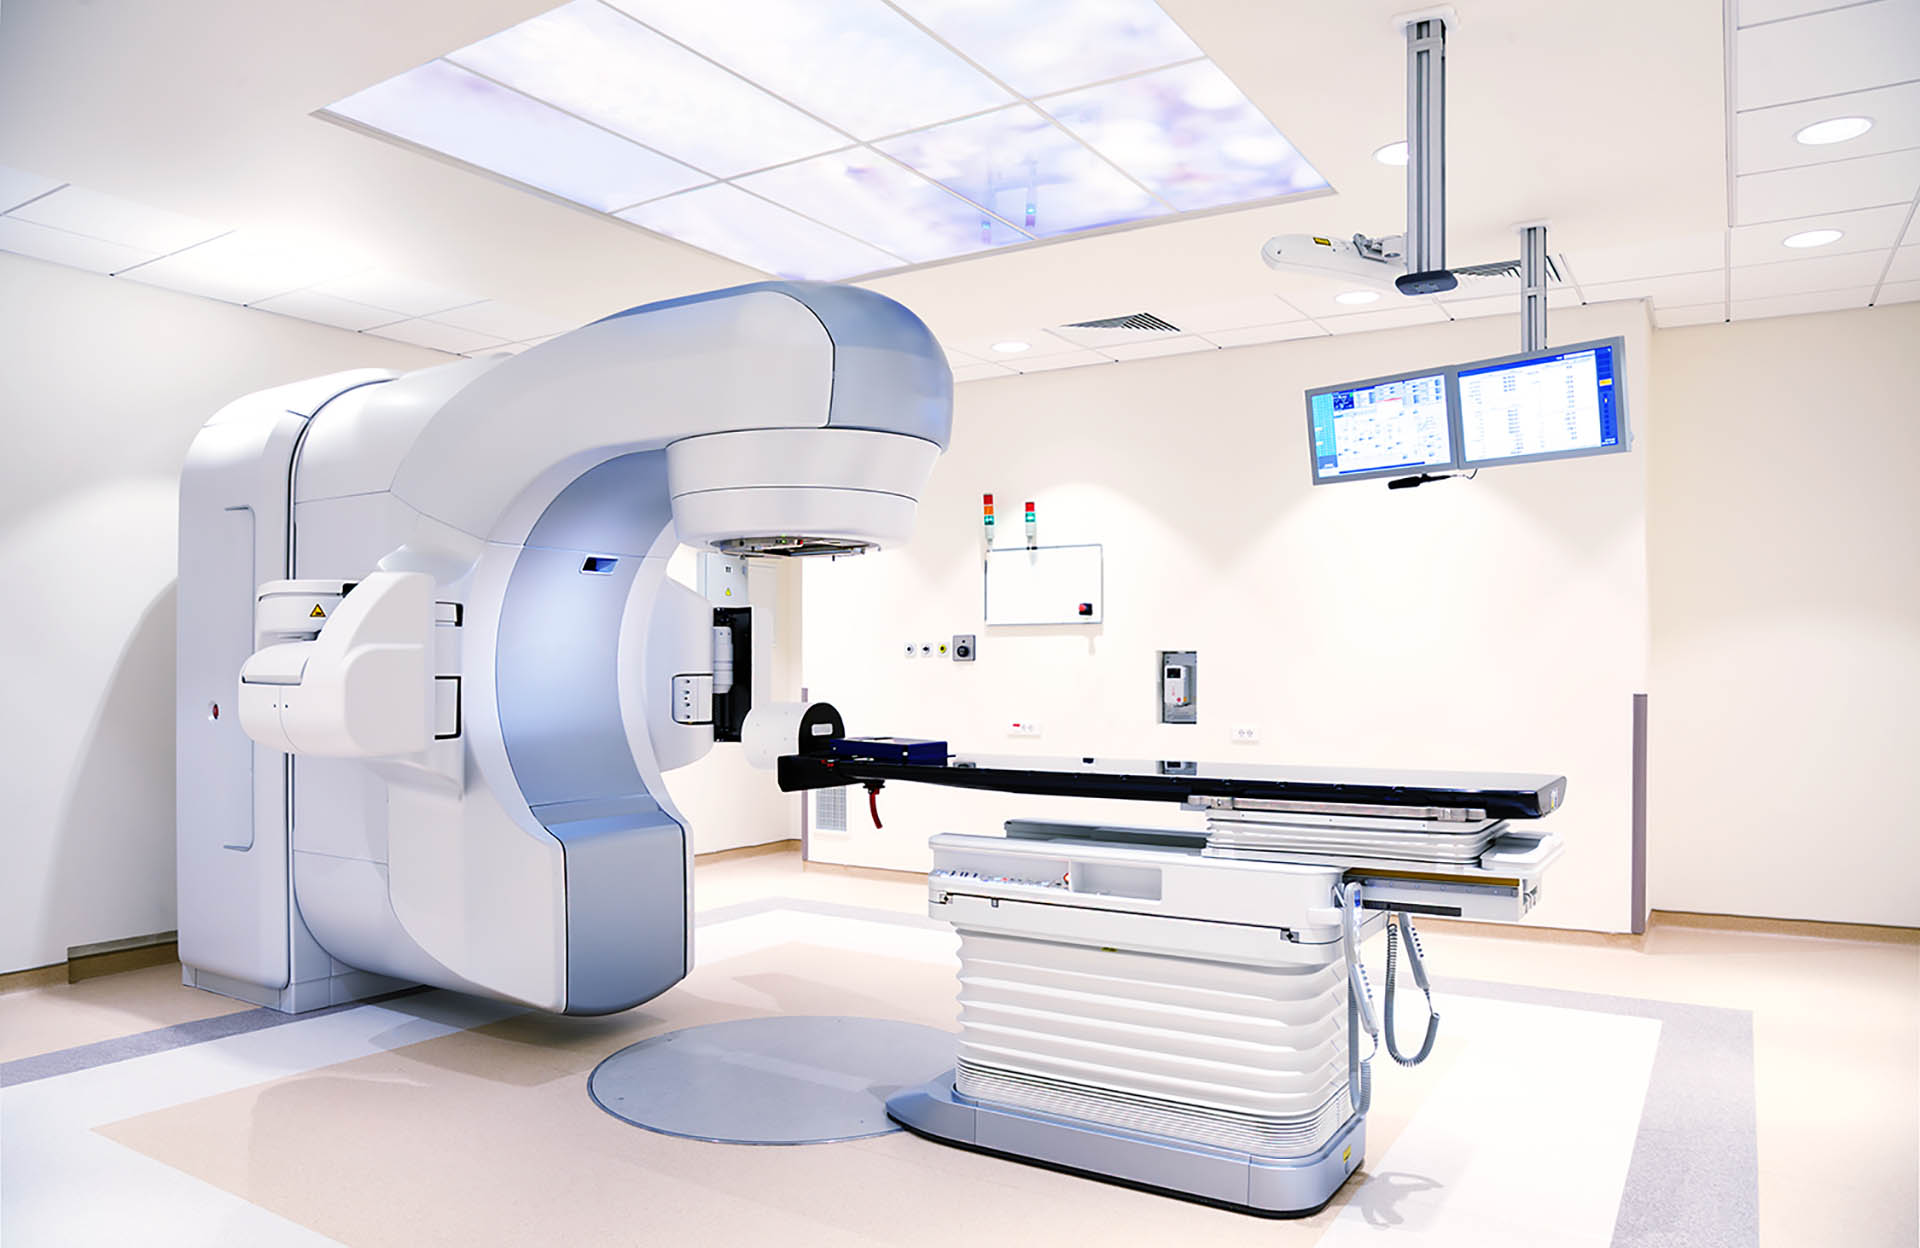 The MRI examination room is reopened after renovation